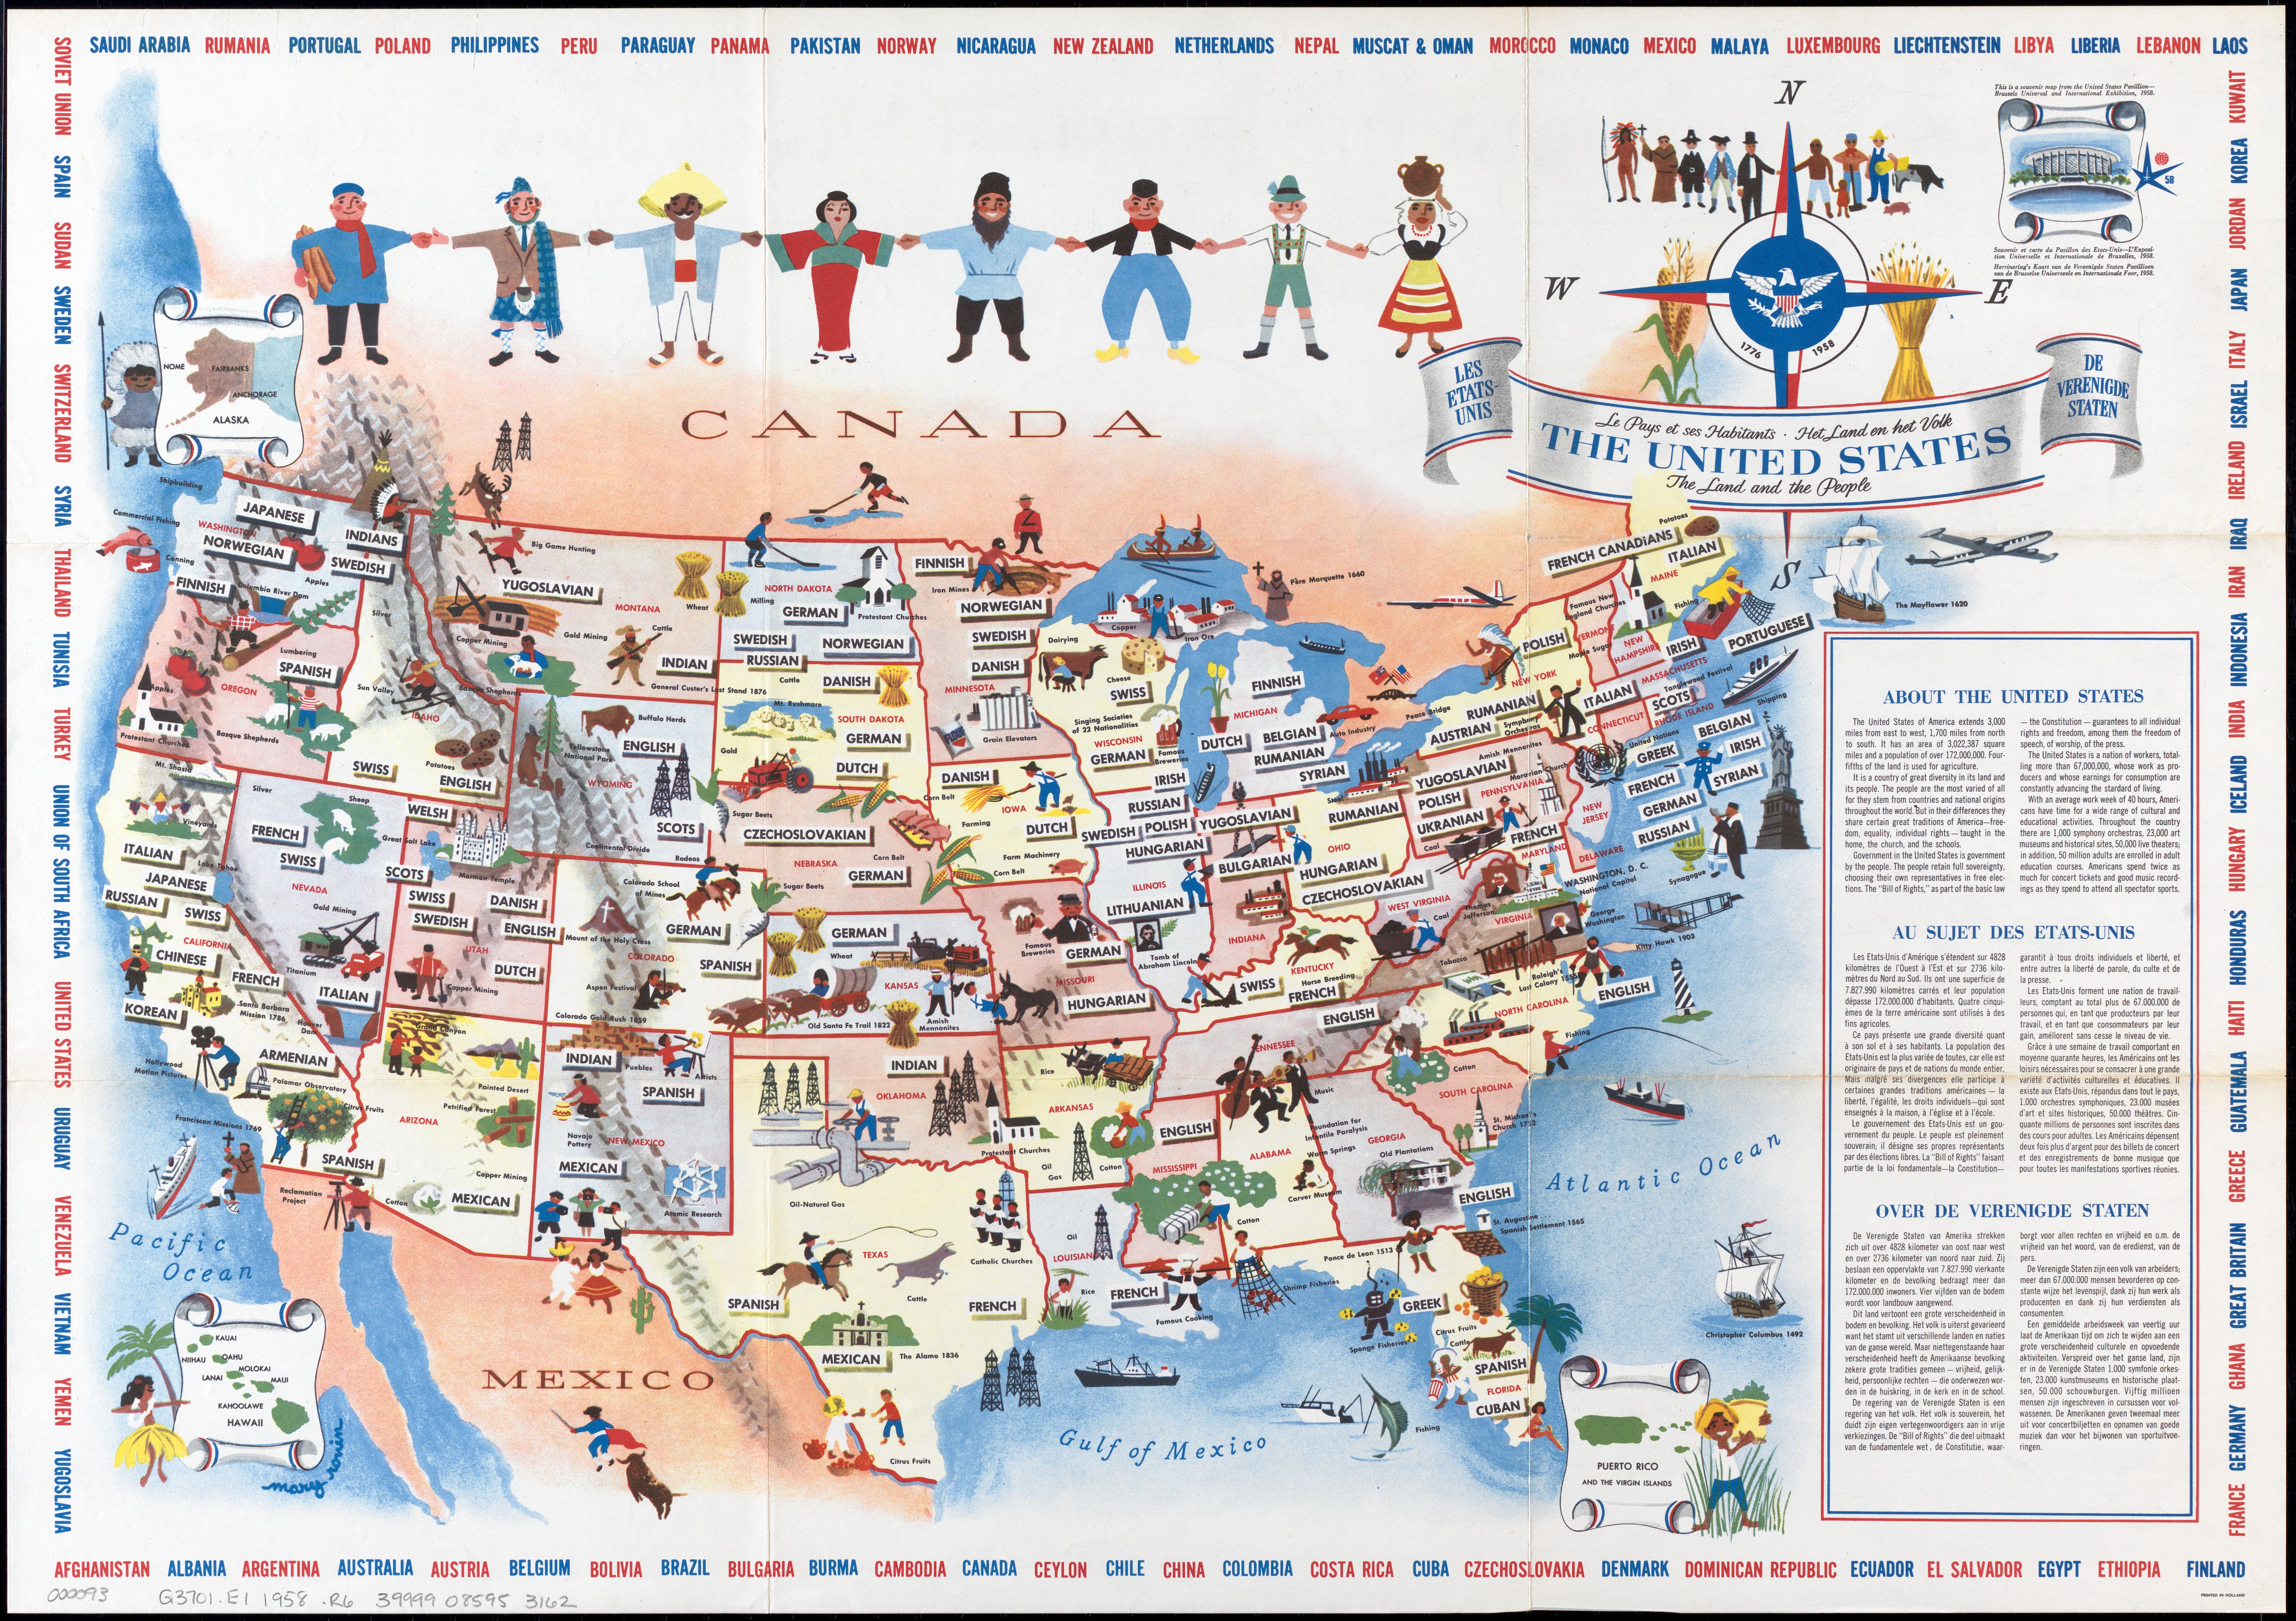 Pictorial Maps of Americana